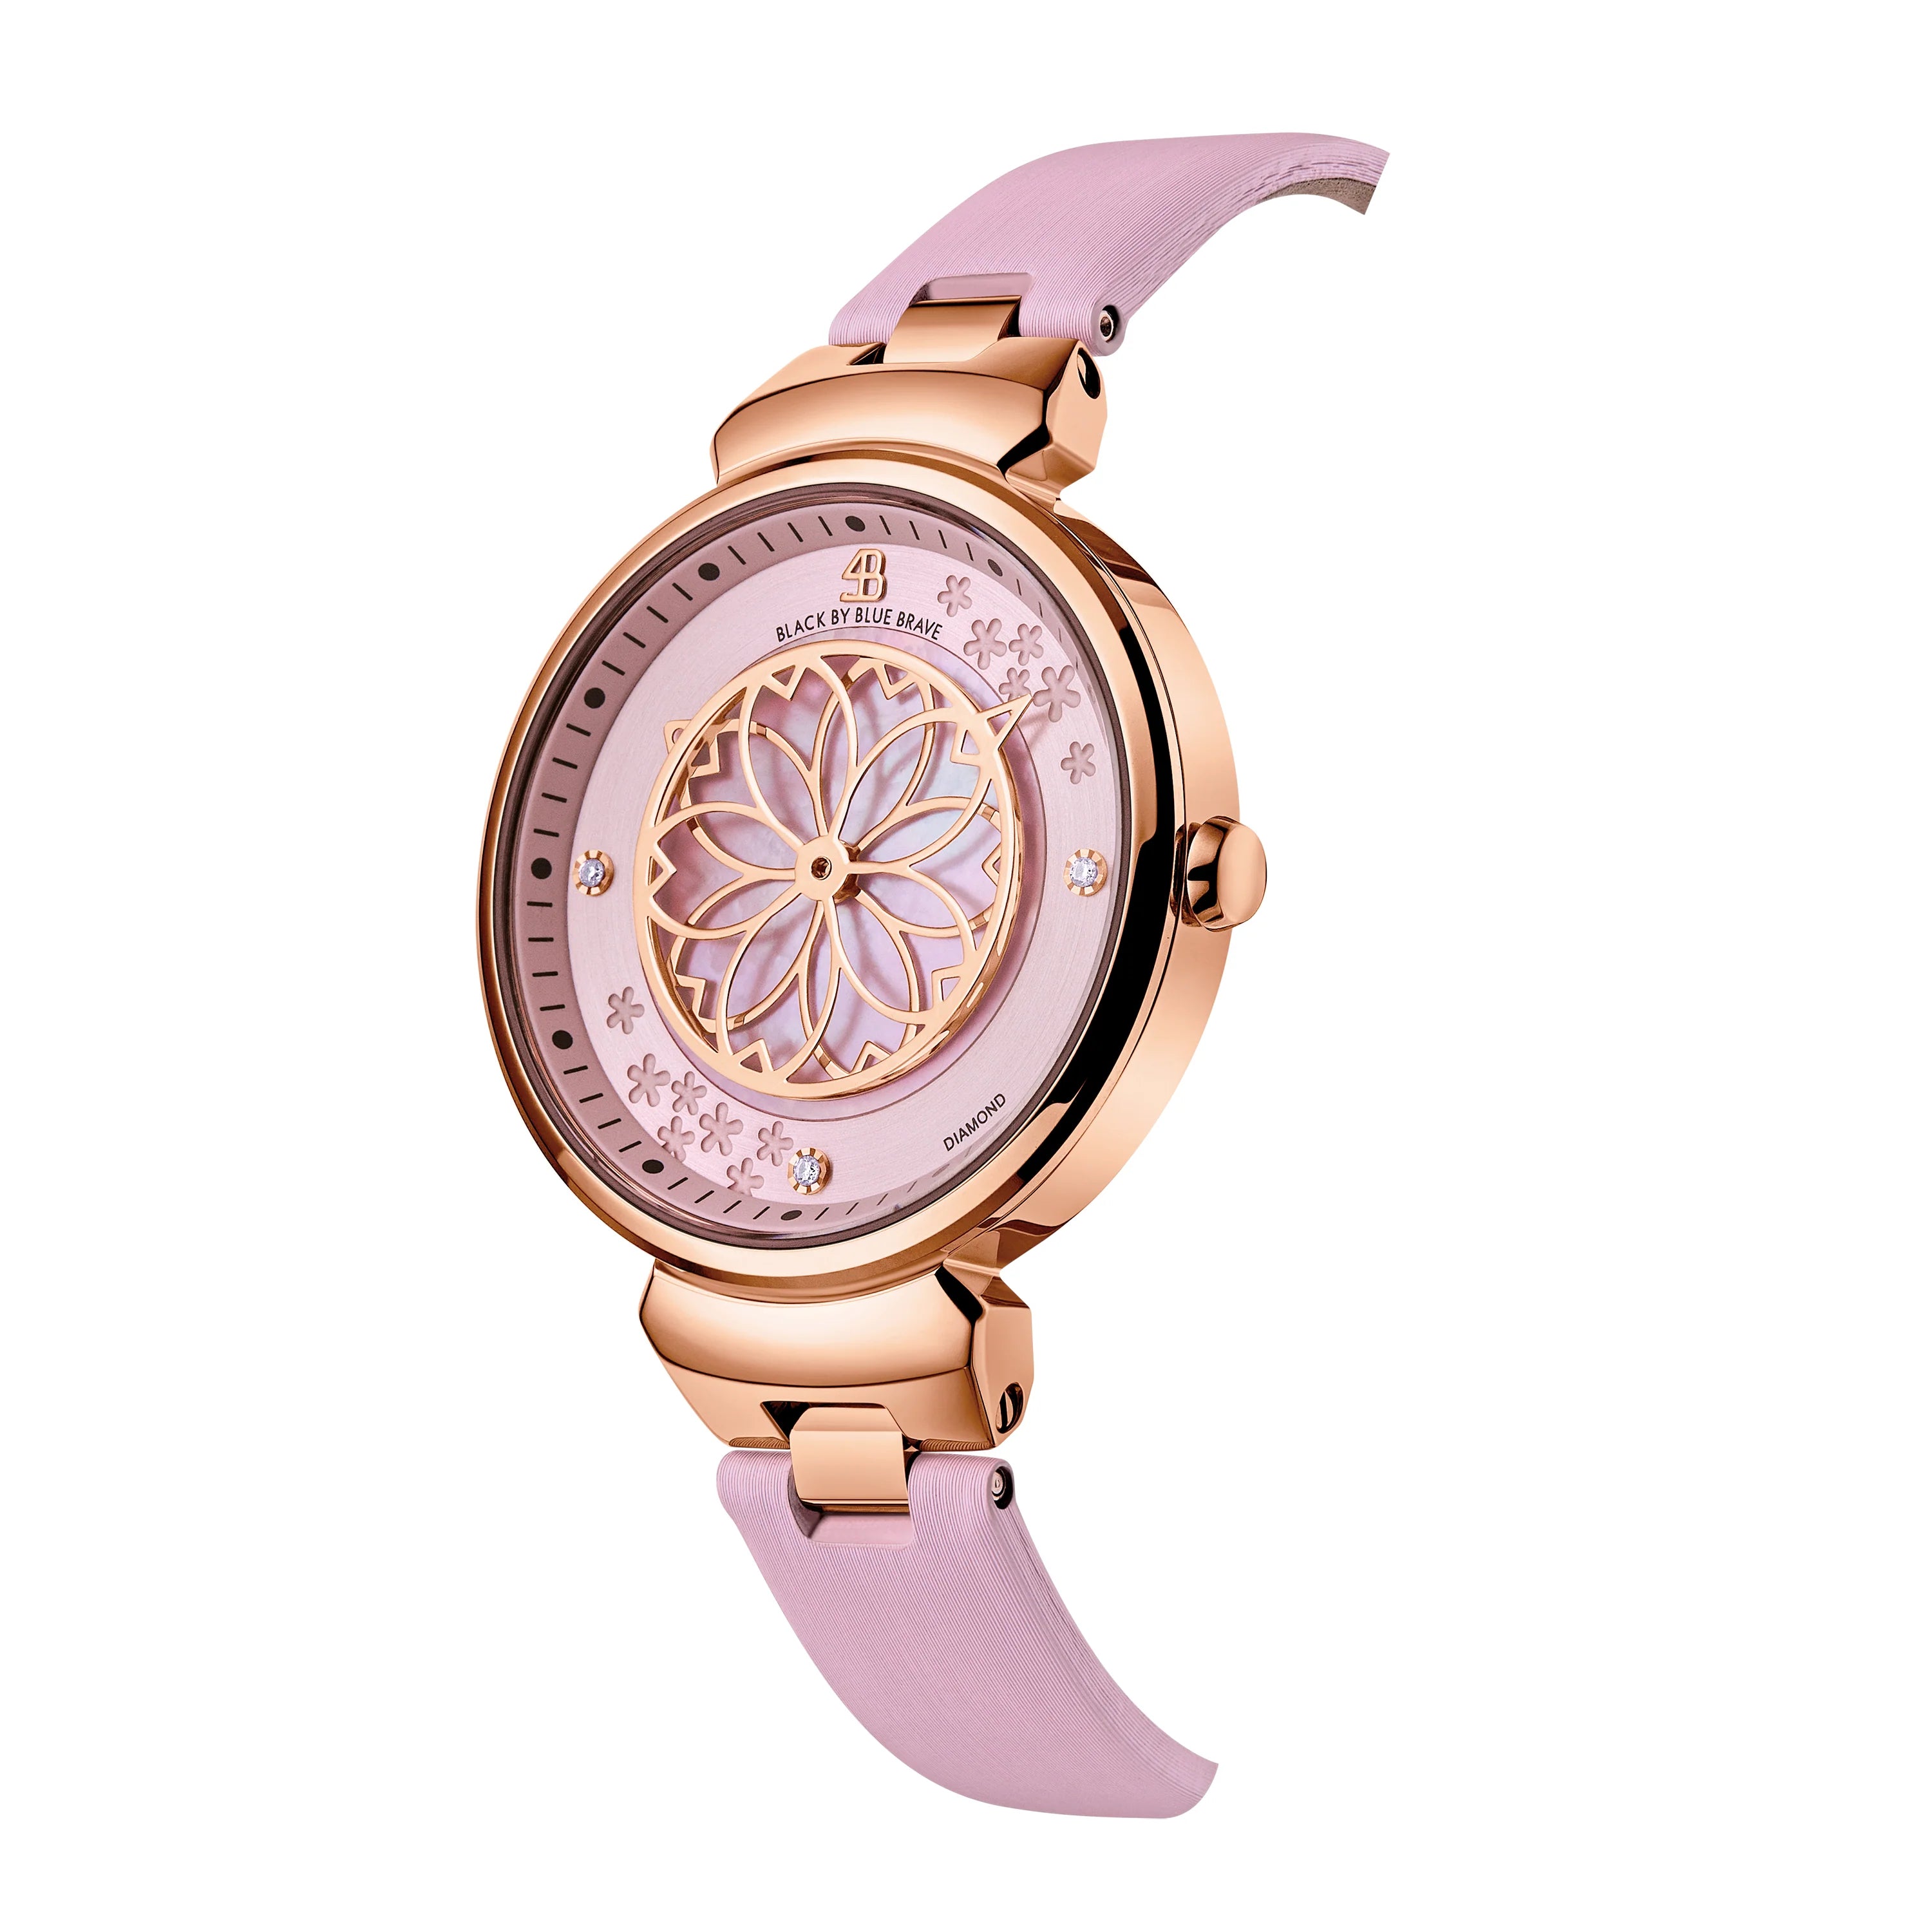 Pink Cherry Blossom Watch With Flower Ceramic Jewelleries（Earrings & Necklace）